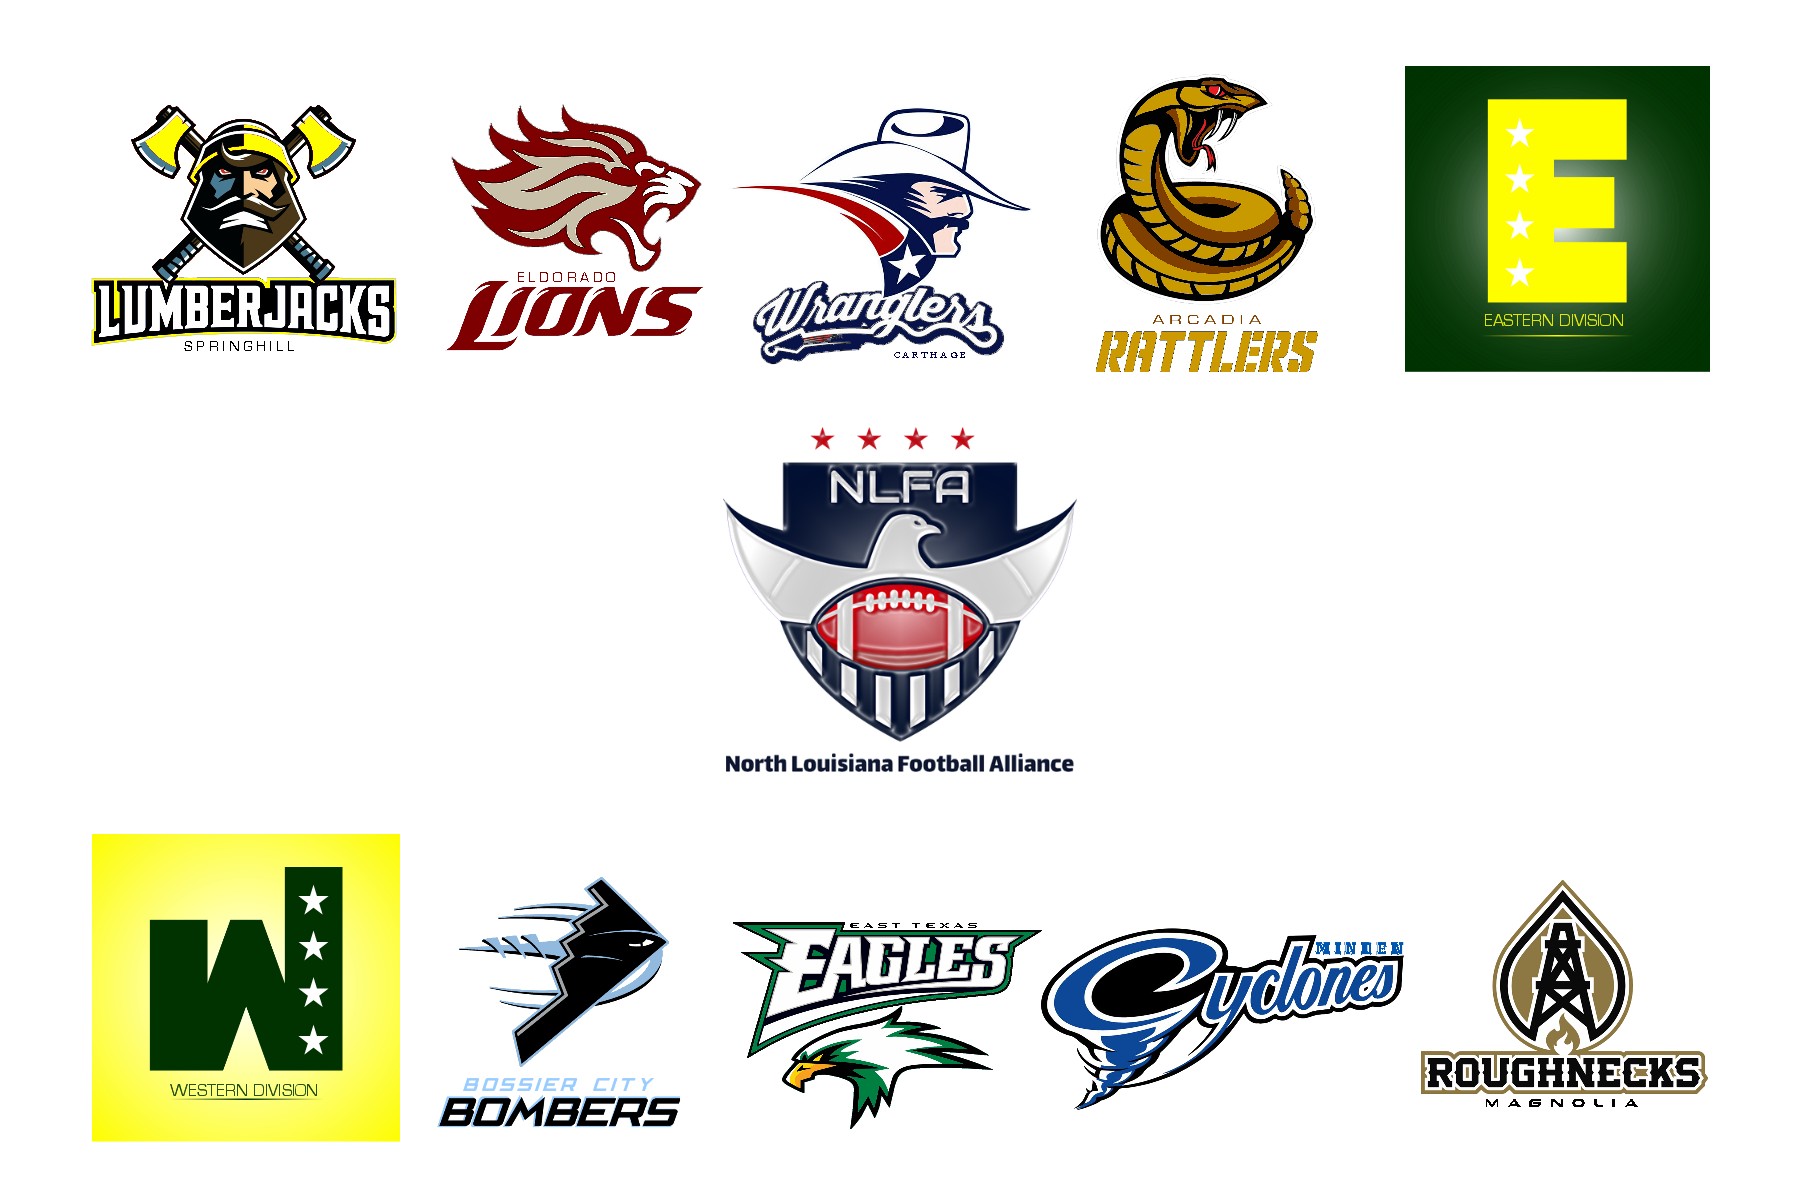 New SemiPro Football League Announces Team Names and Logos North